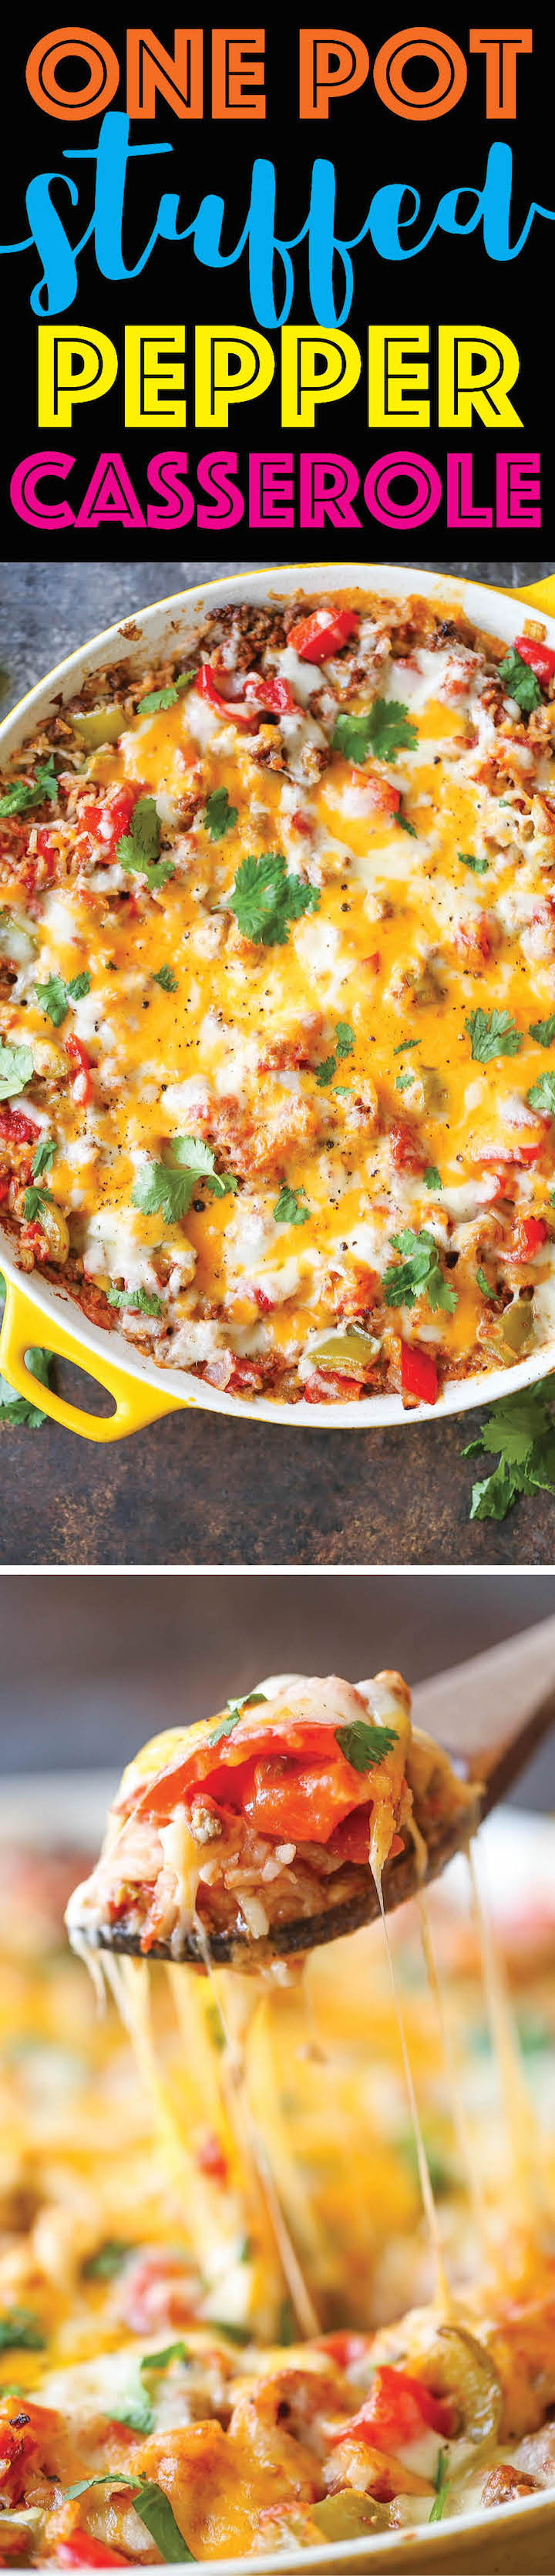 One Pot Stuffed Pepper Casserole - All the flavors of stuffed peppers without any of the fuss coming together in ONE PAN! So hearty, decadent and filling!